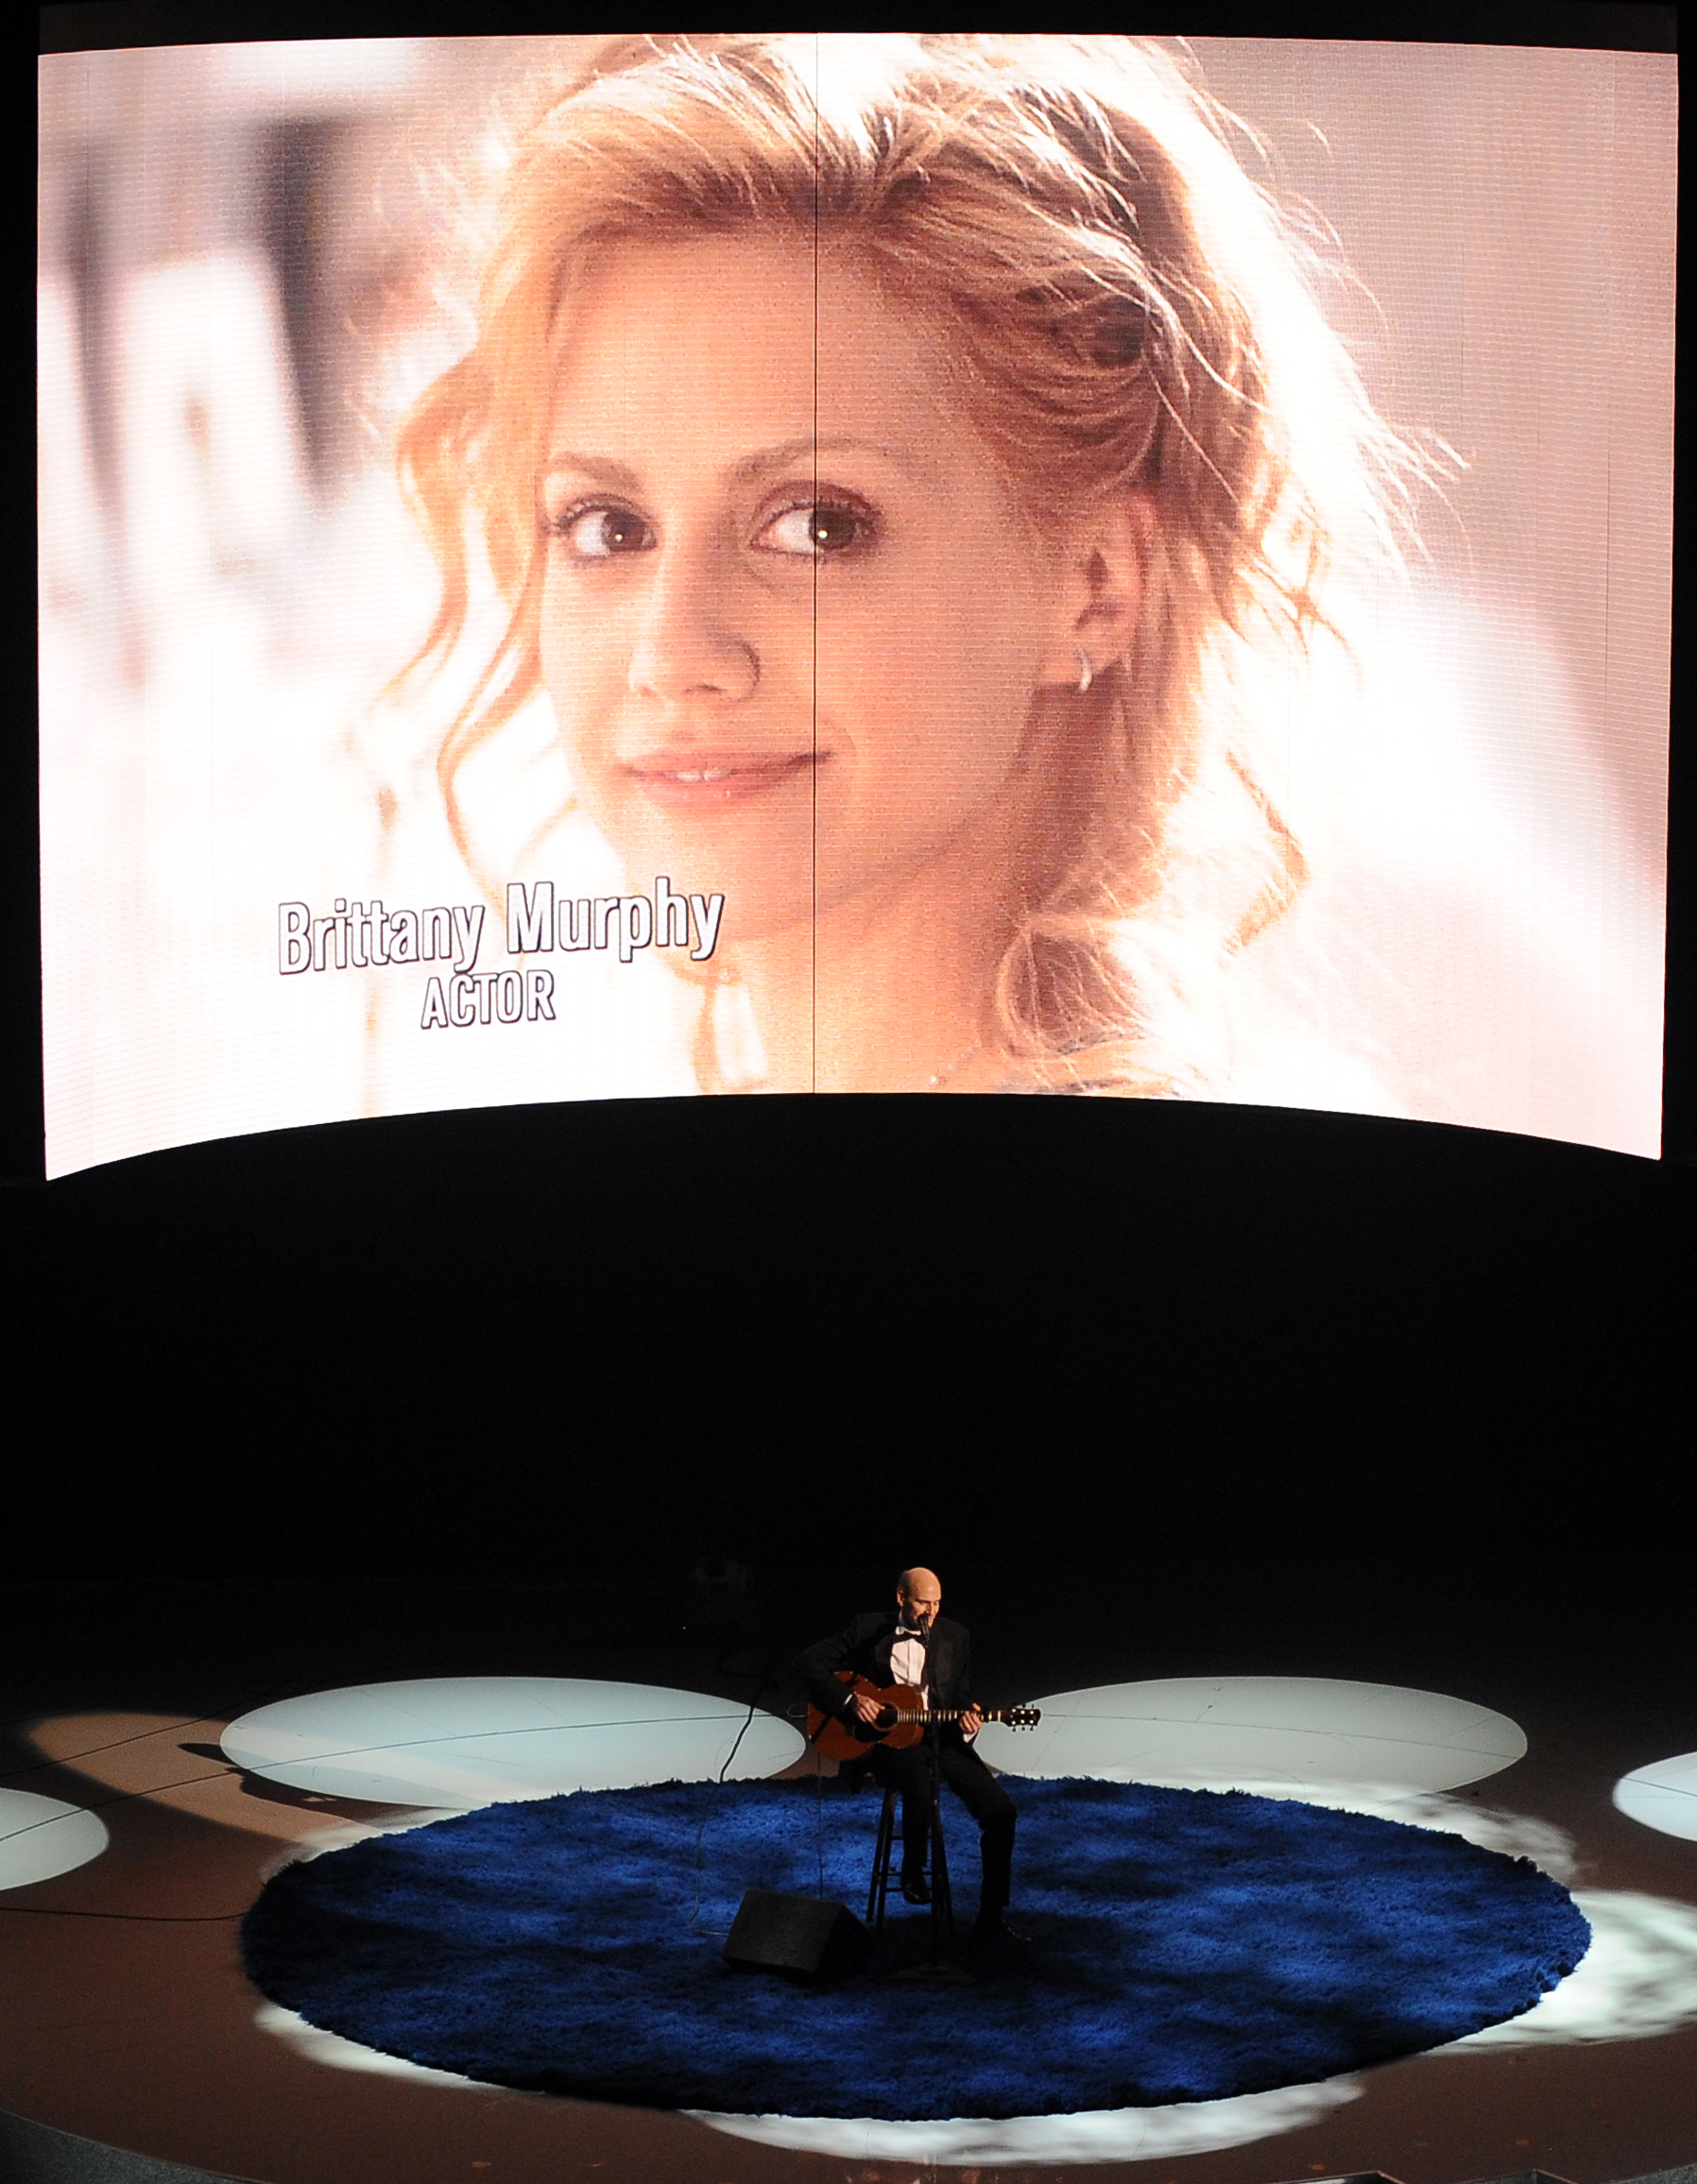 Singer James Taylor pays tribute to deceased actors and singers as an image of Brittany Murphy is projected behind him at the 82nd Academy Awards at the Kodak Theater in Hollywood, California on March 7, 2010. | Source: Getty Images